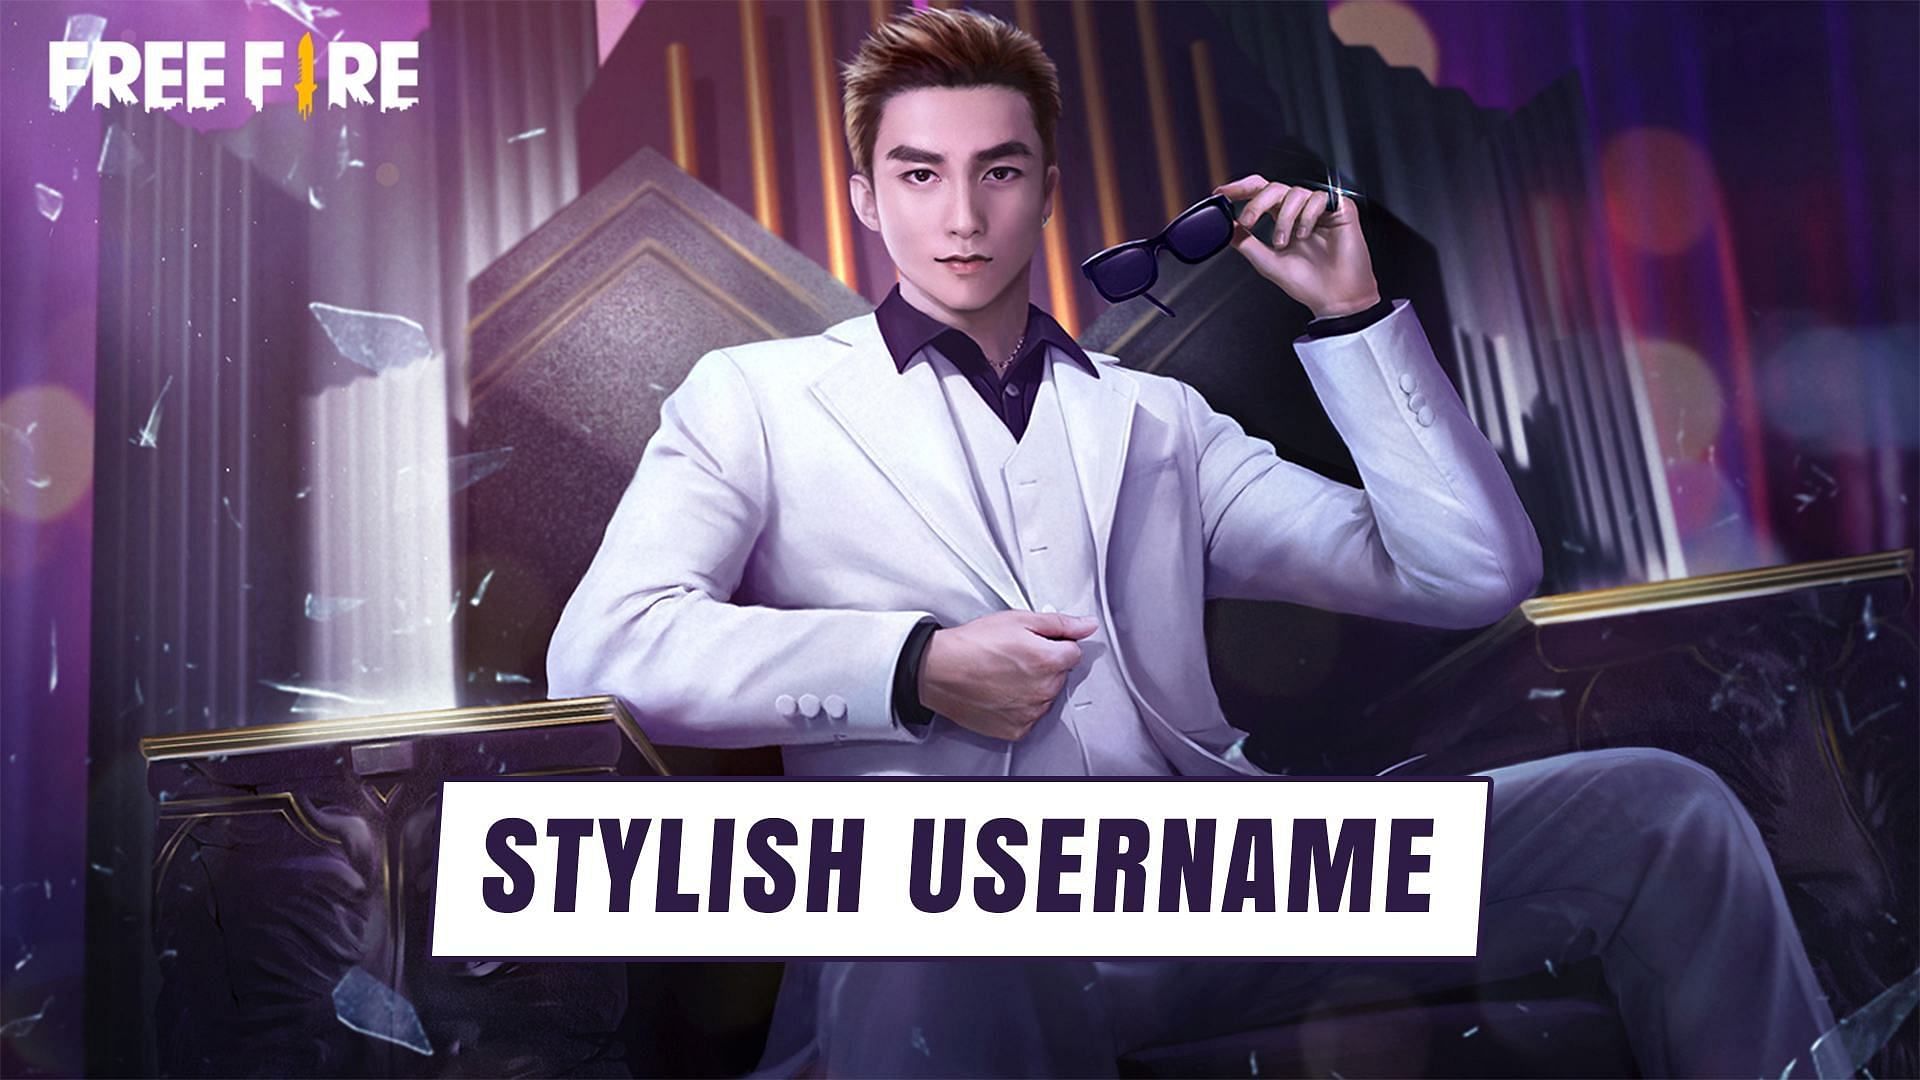 Having a stylish username is a new trend in the Free Fire community (Image via Sportskeeda)